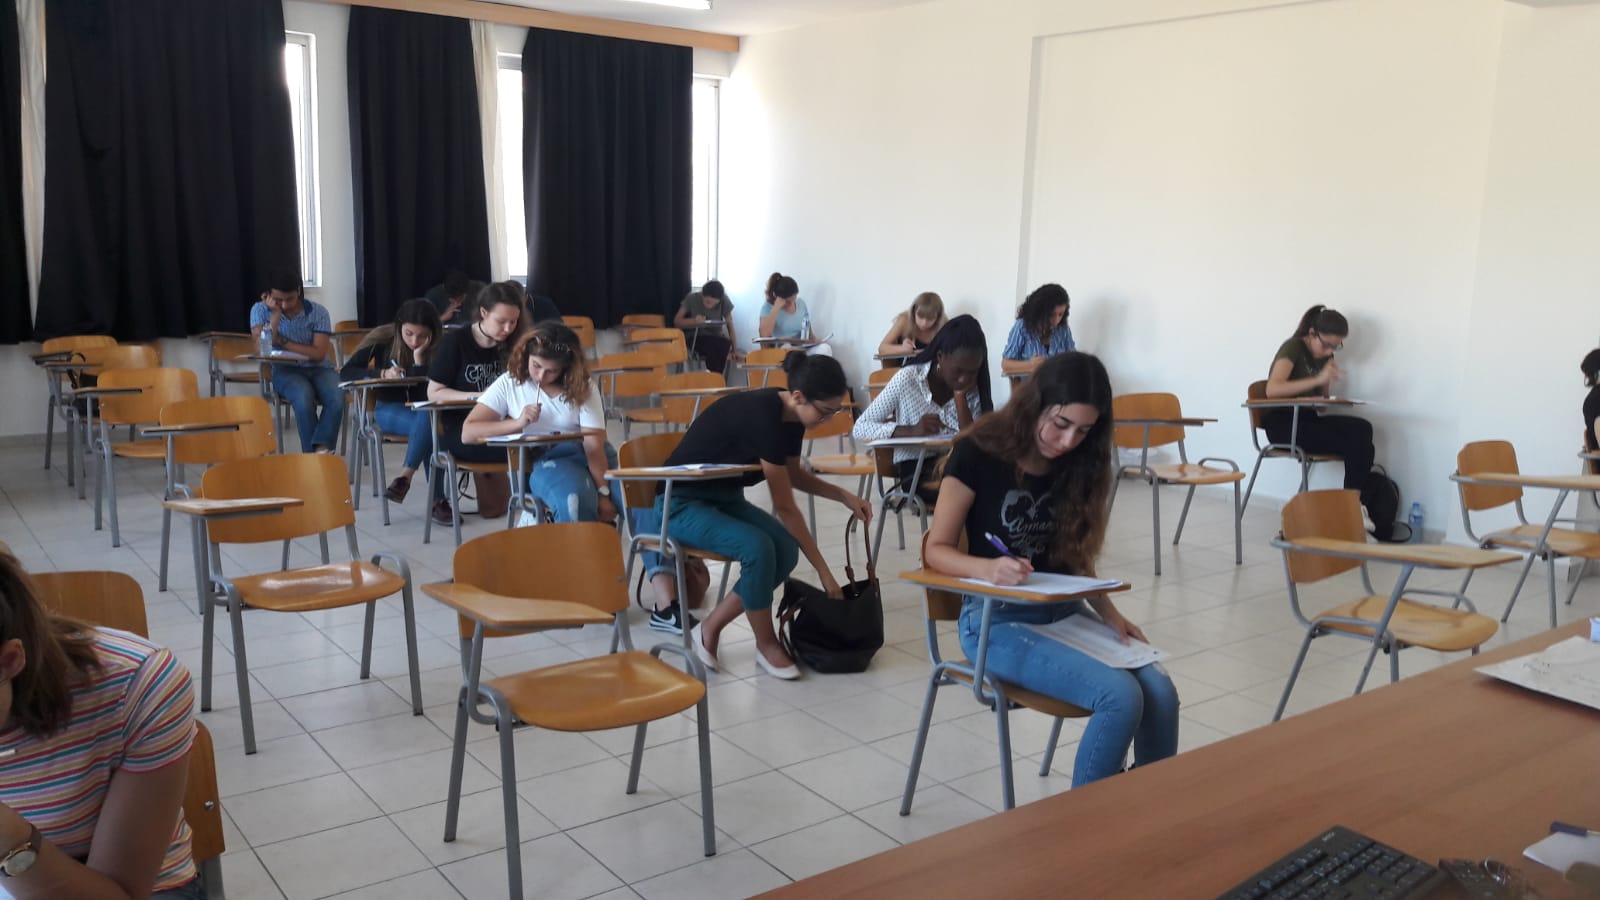 English Proficiency and Level Placement Exam for New Students was held at Near East University